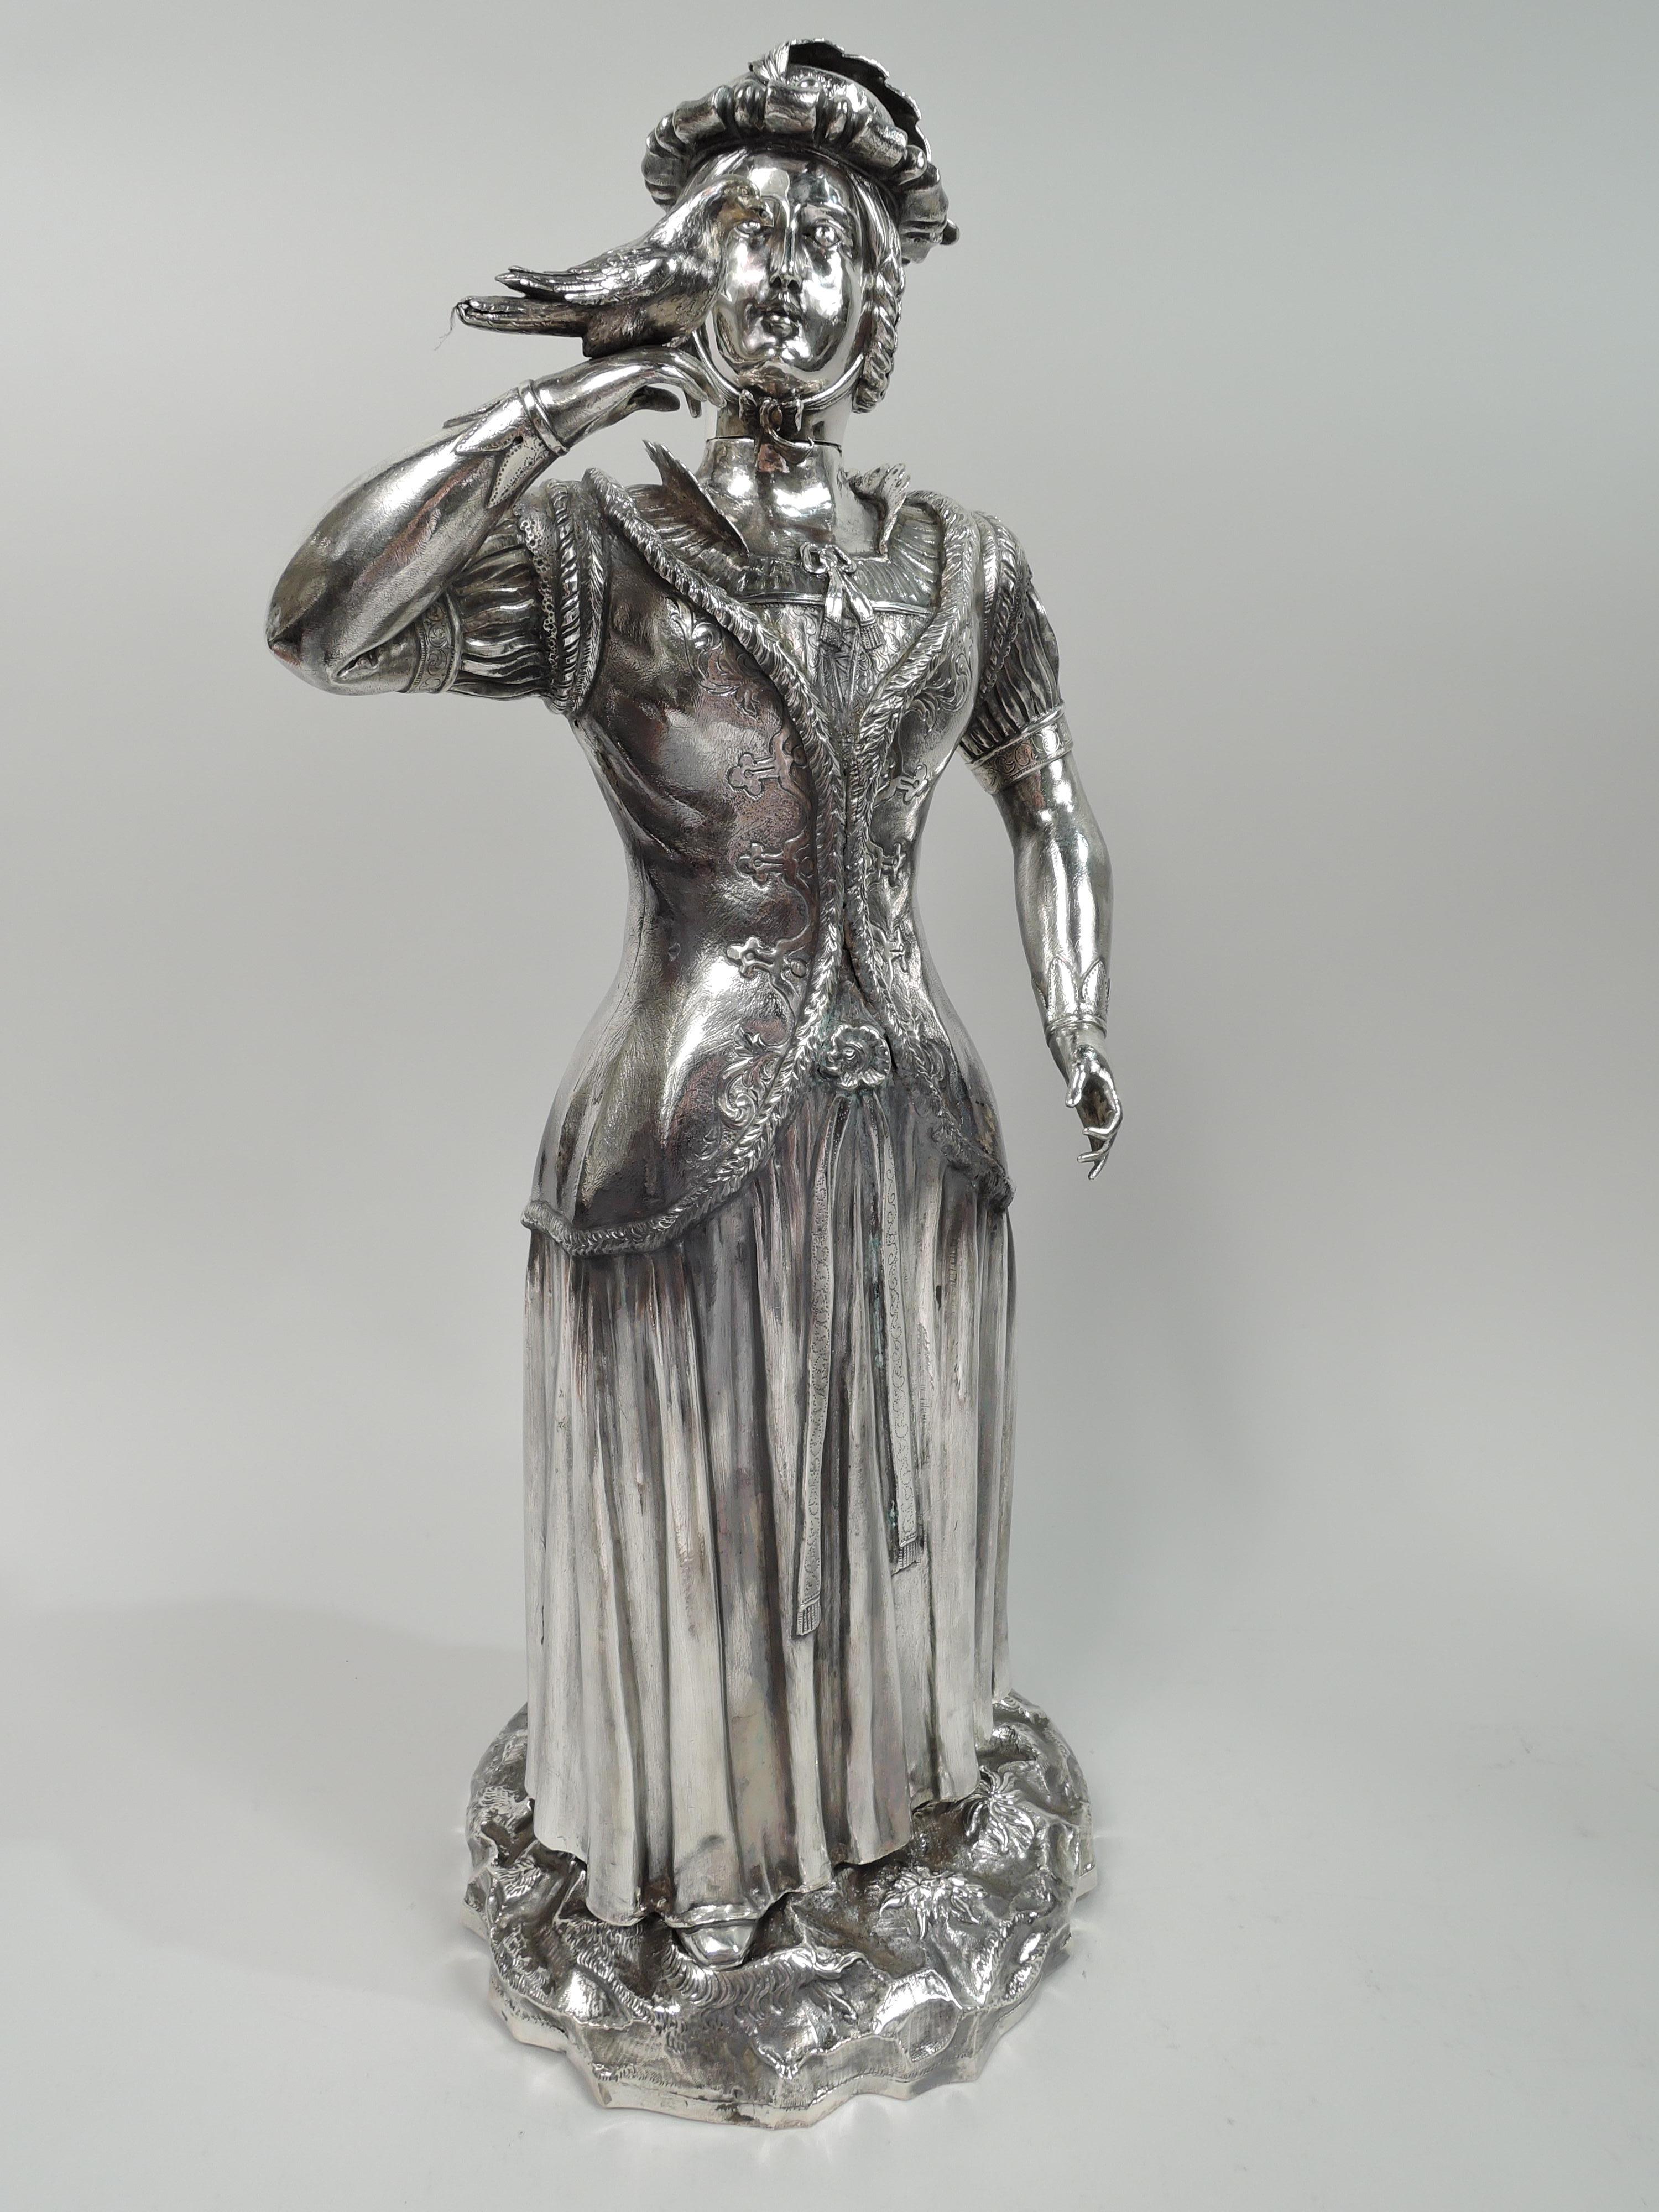 Pair of German silver Renaissance hunting figures, ca 1890. The man wears doublet over baggy chemise and hose with belt hanging loosely around hips. A long hat feather drapes gracefully along his arm. The horn is raised expectantly while the other